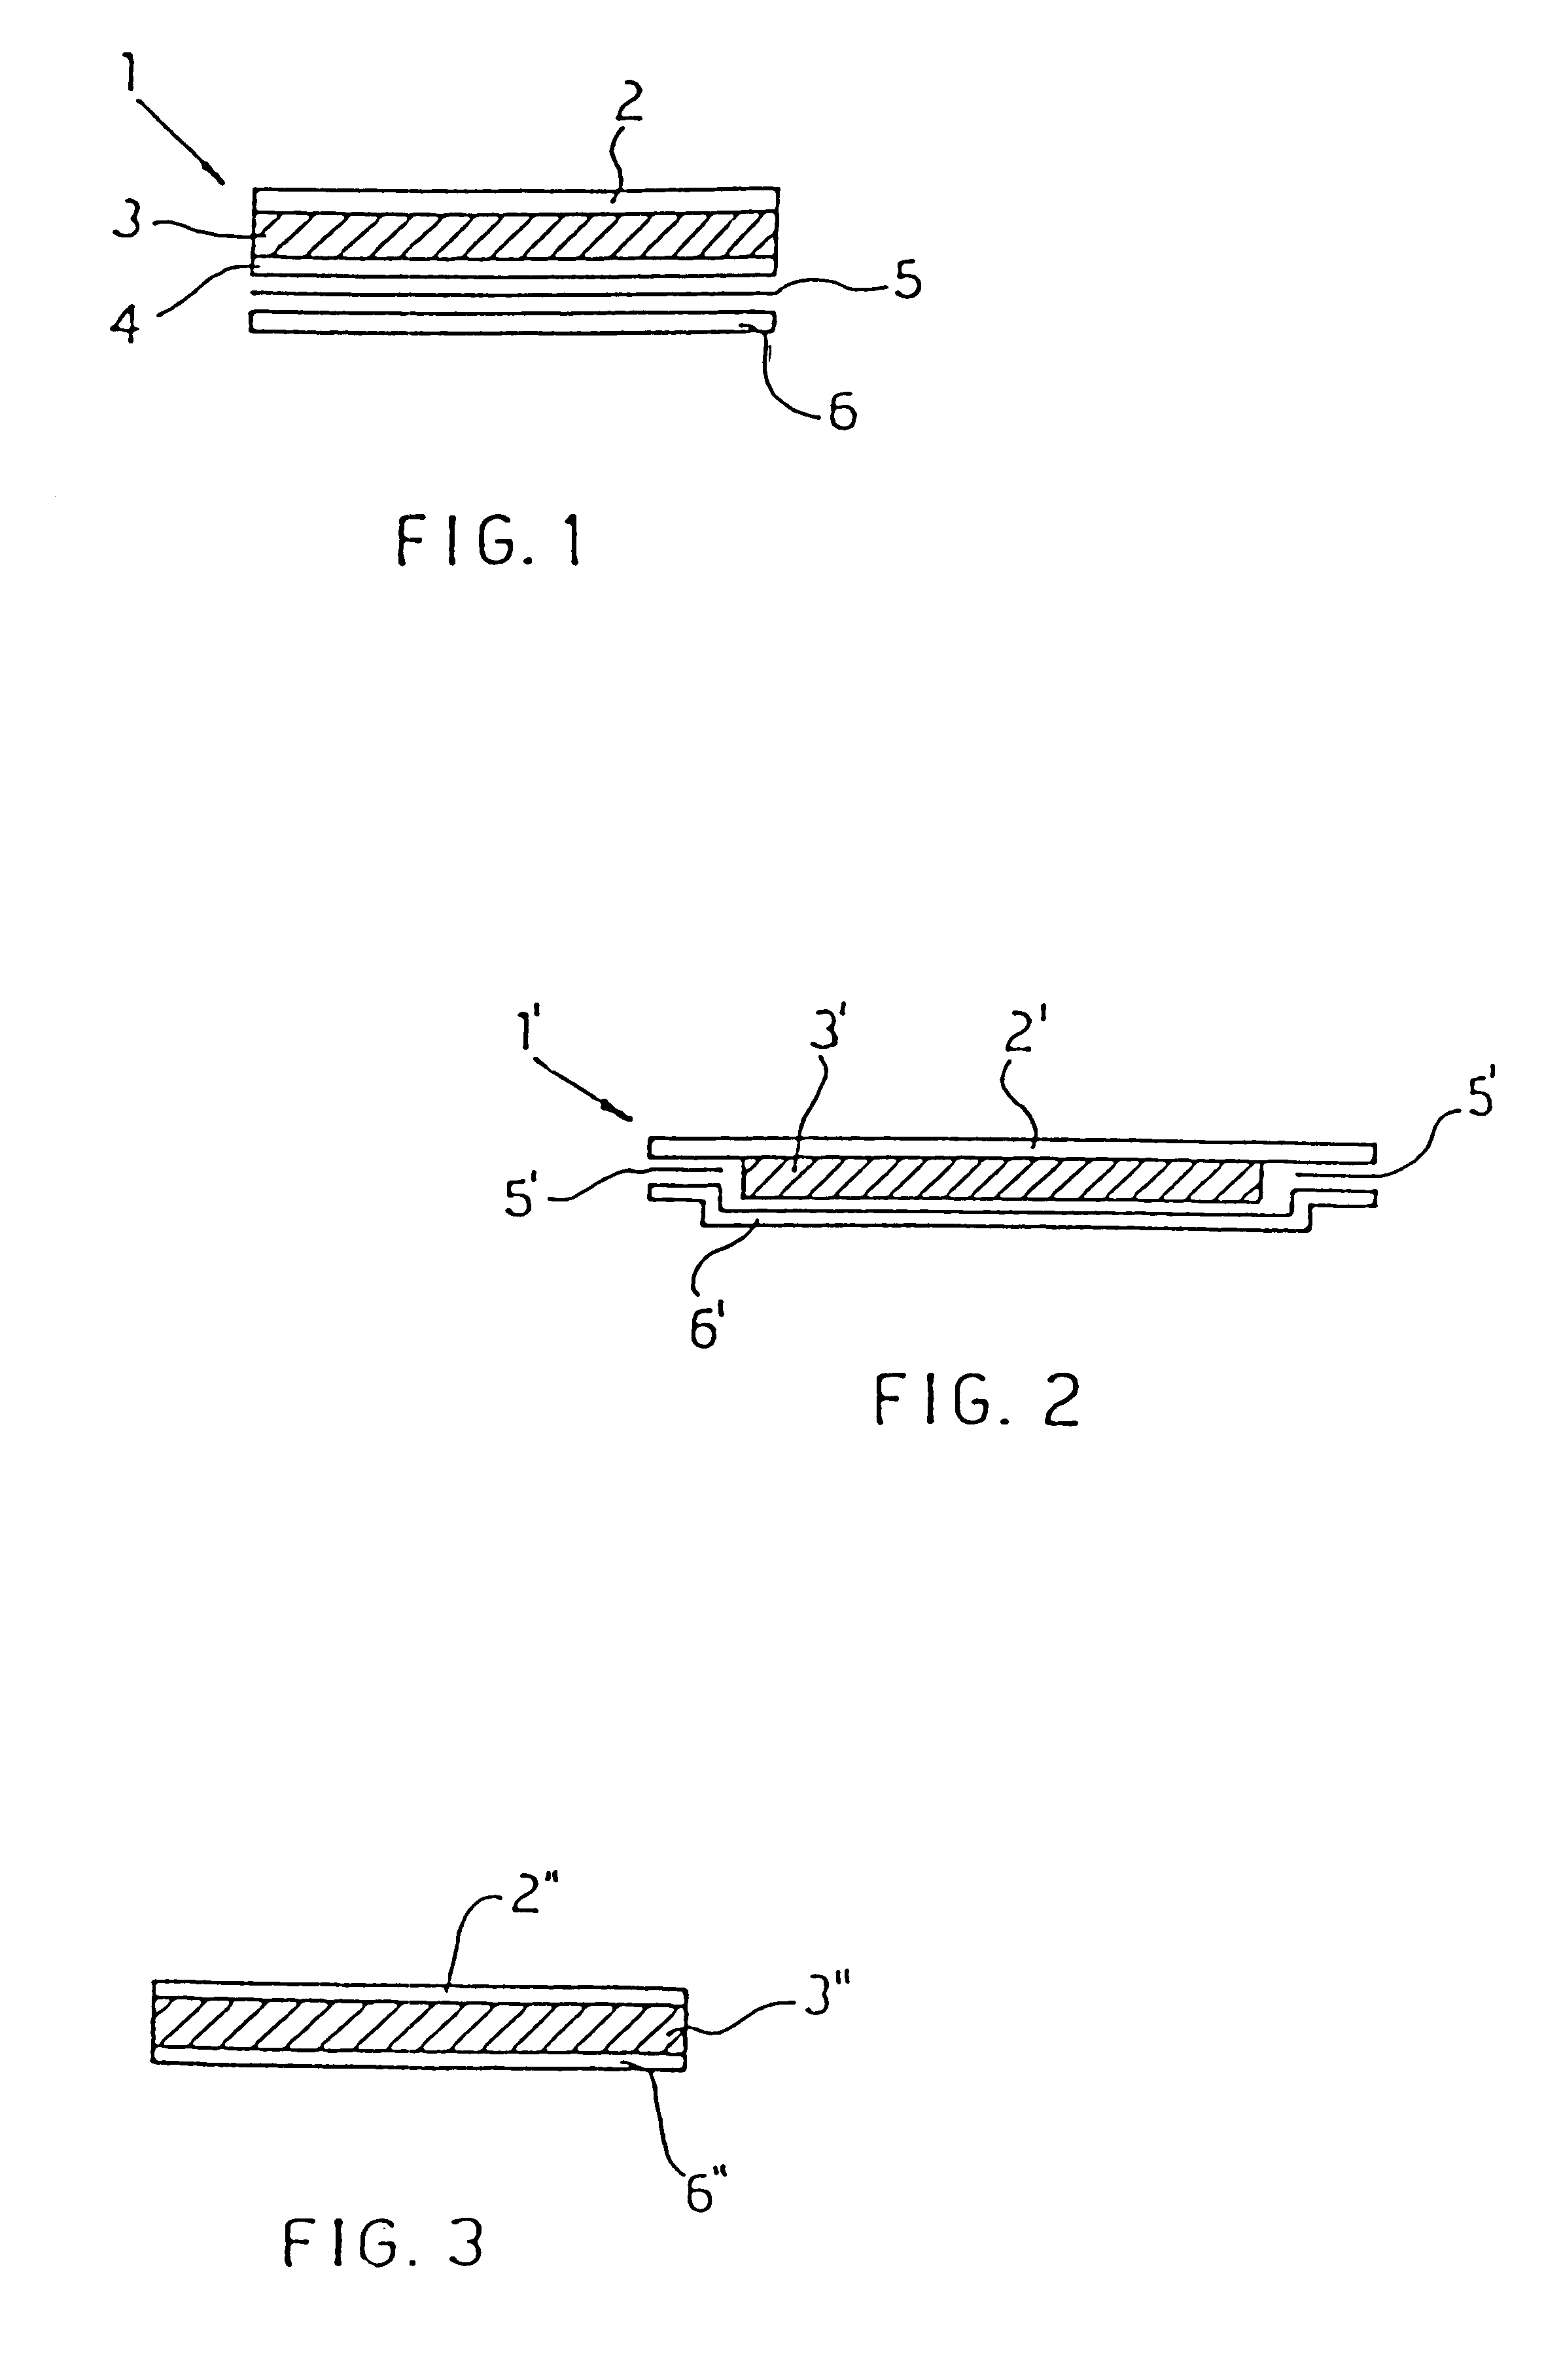 Transdermal patch and topical compositions comprising propylnorapomorphine